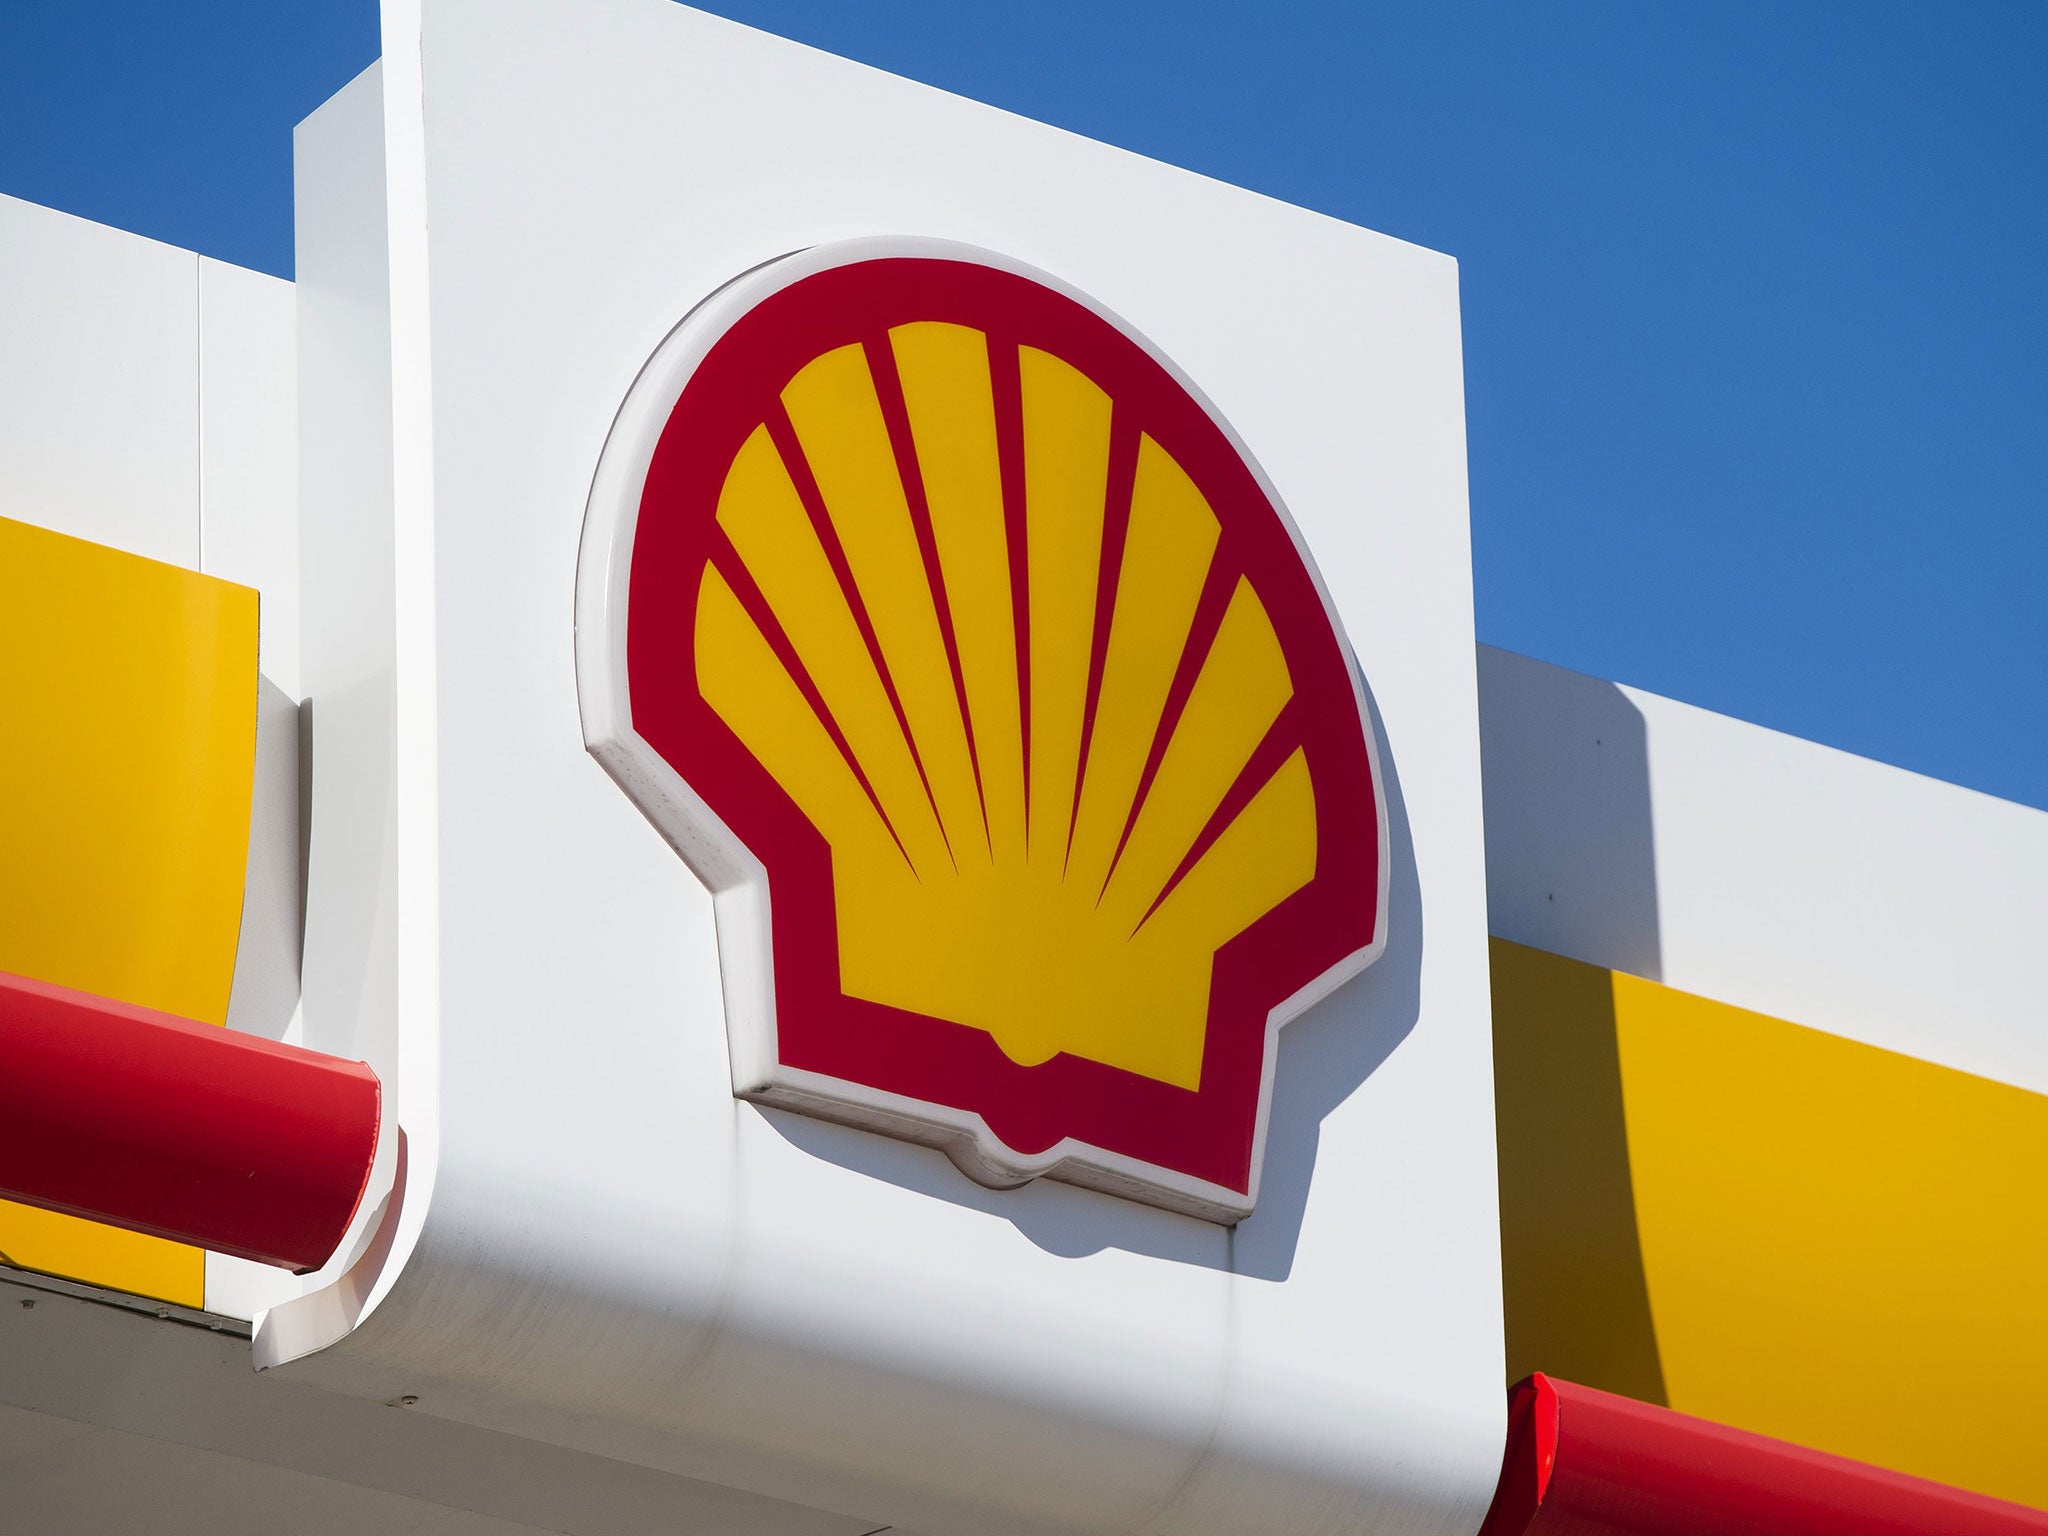 Royal Dutch Shell says it will close offices in Reading, Aberdeen and Manchester